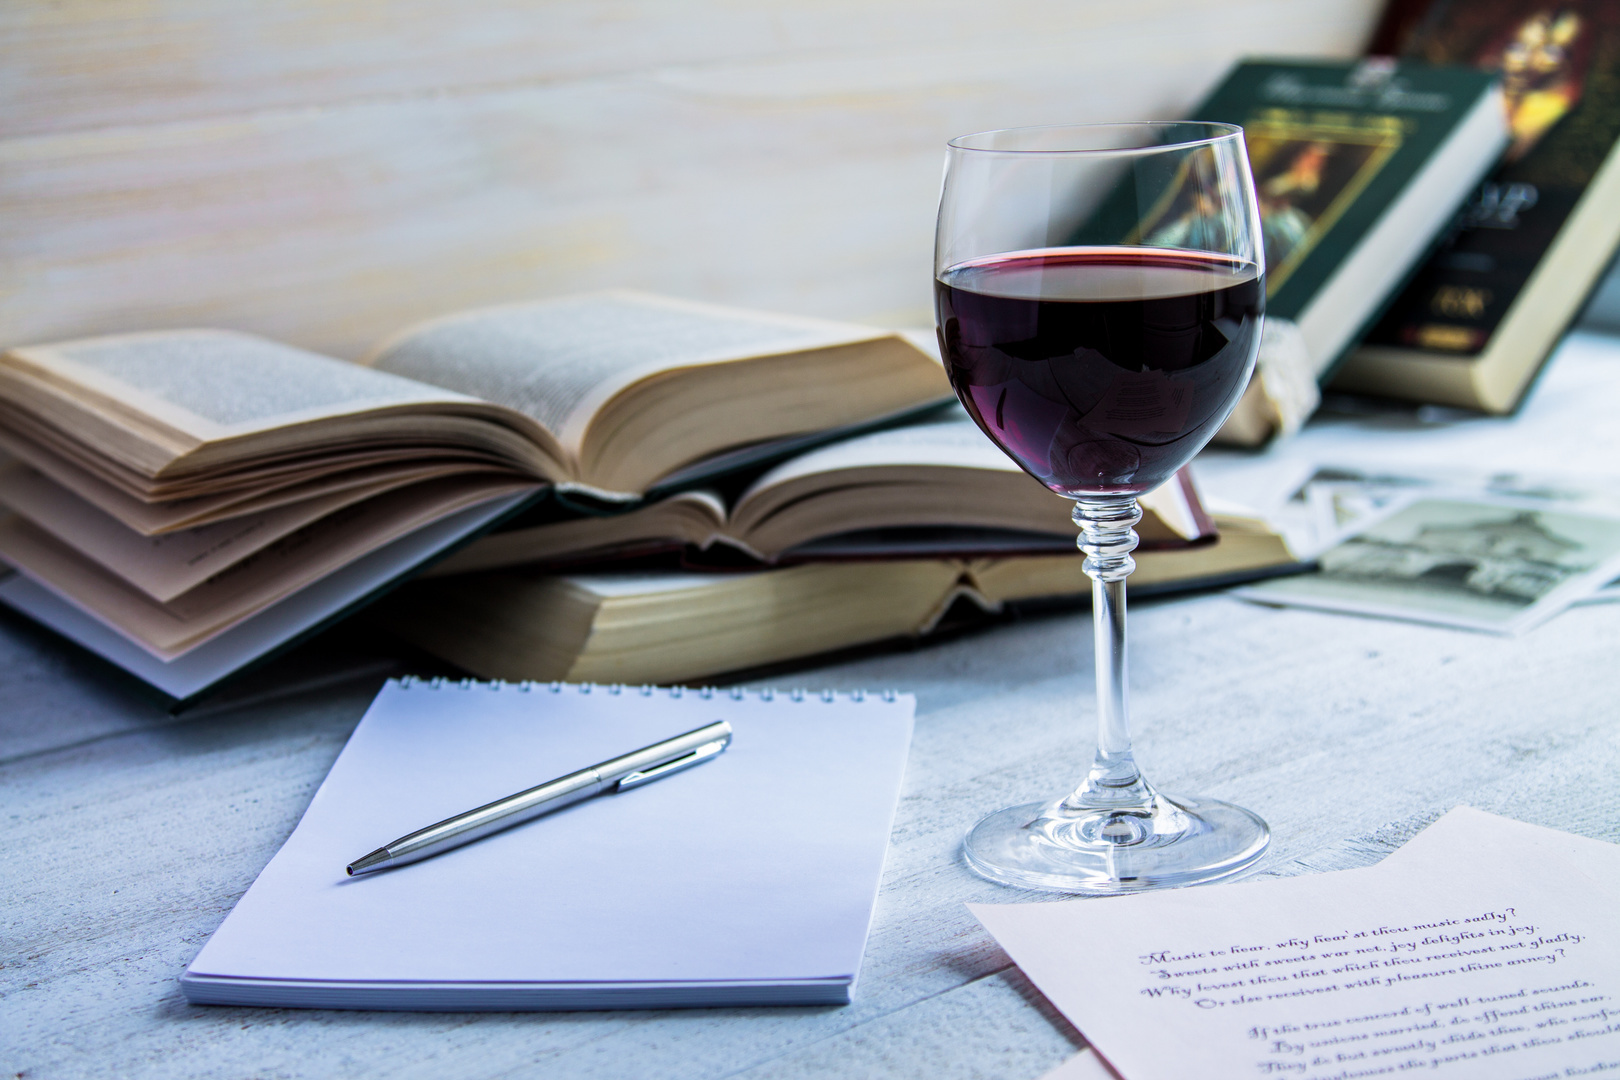 Authors Uncorked: A Wine Tasting Inspired by Famous Writers [October 30], Cambridge, Massachusetts, United States